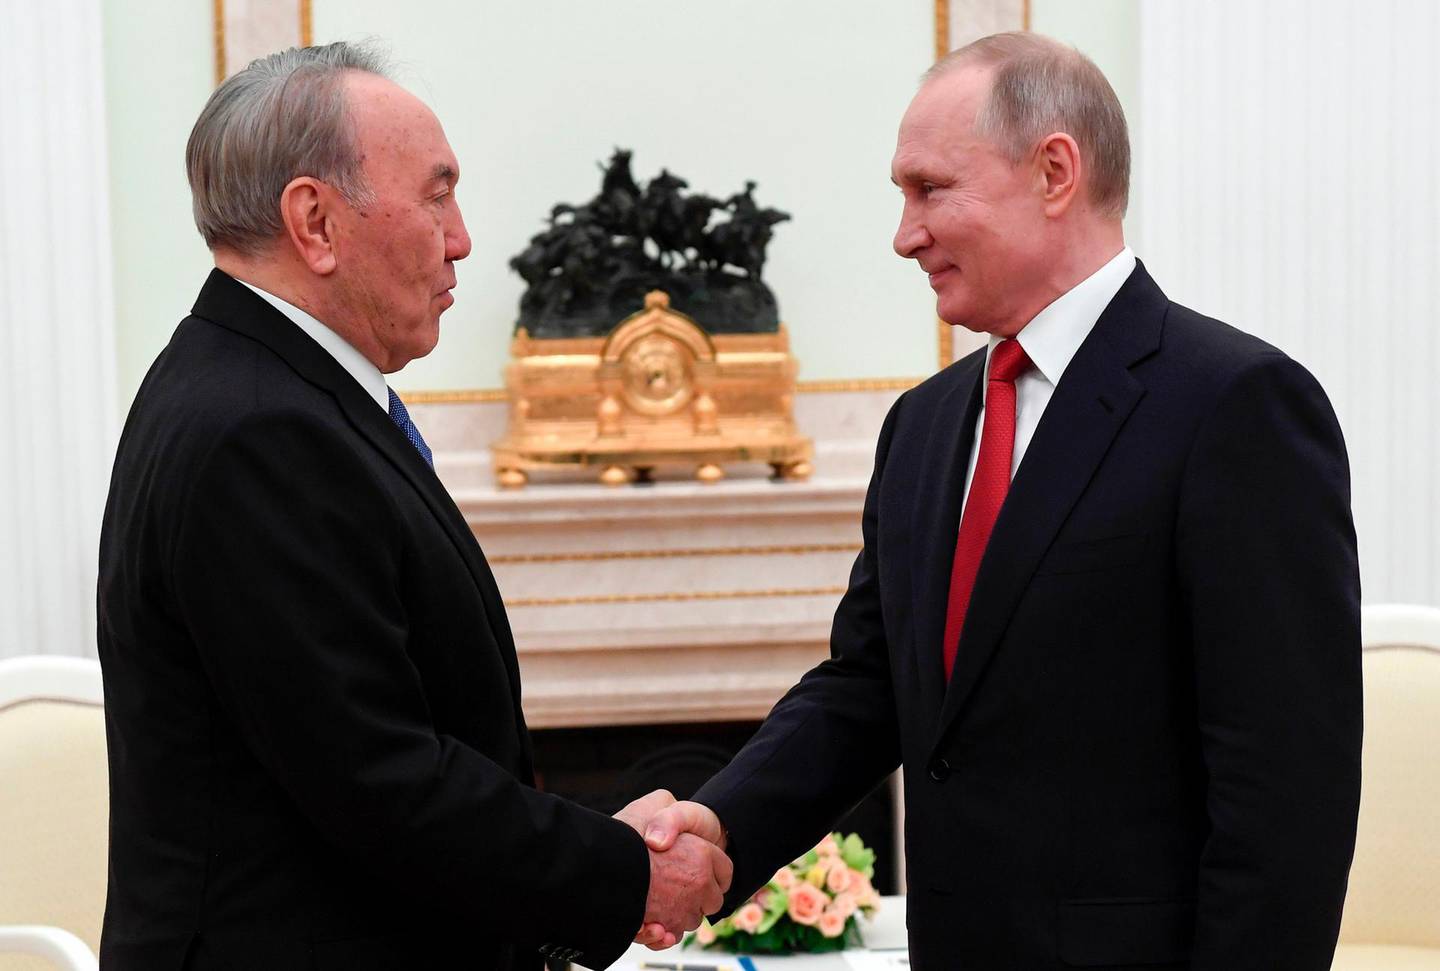 Russian President Vladimir Putin, right, shakes hands with former President of Kazakhstan Nursultan Nazarbayev during their meeting in Kremlin in Moscow, Russia, Tuesday, March 10, 2020. During the meeting, Putin boasted a "strategic alliance" between the two ex-Soviet nations. (Alexei Nikolsky, Sputnik, Kremlin Pool Photo via AP)